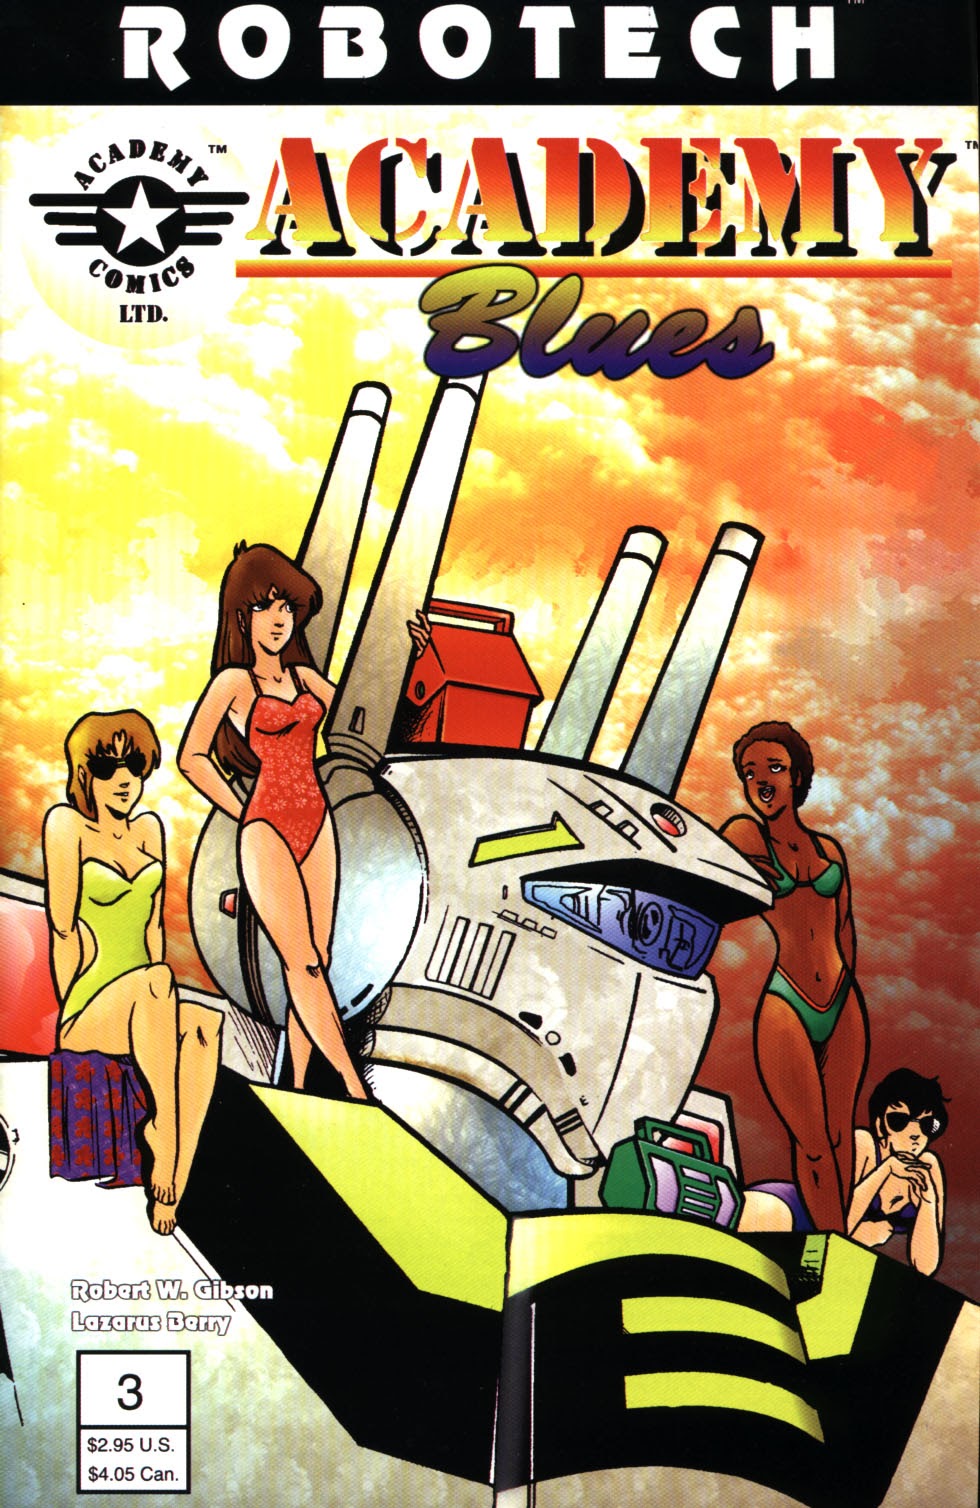 Read online Robotech Academy Blues comic -  Issue #3 - 1